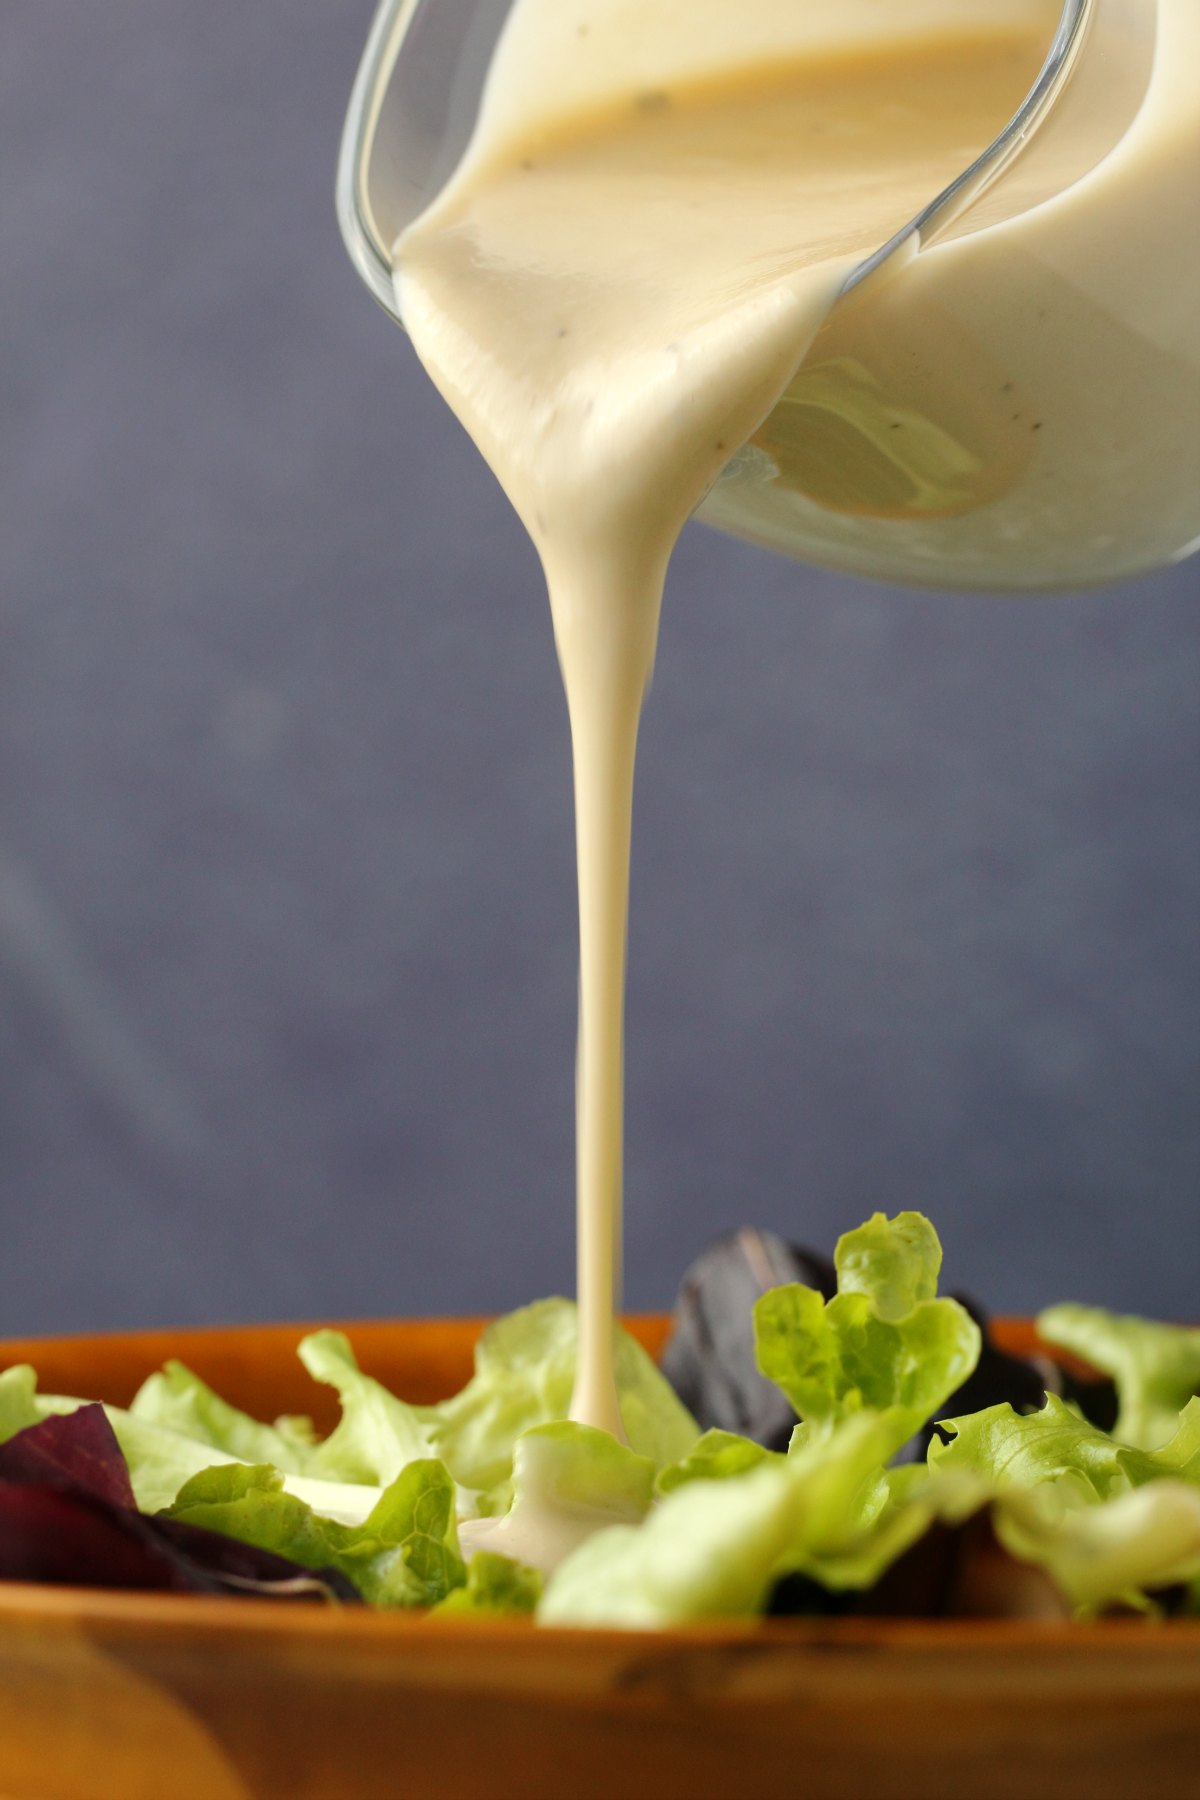 Tahini salad dressing pouring from a glass jug over salad greens in a bowl. 